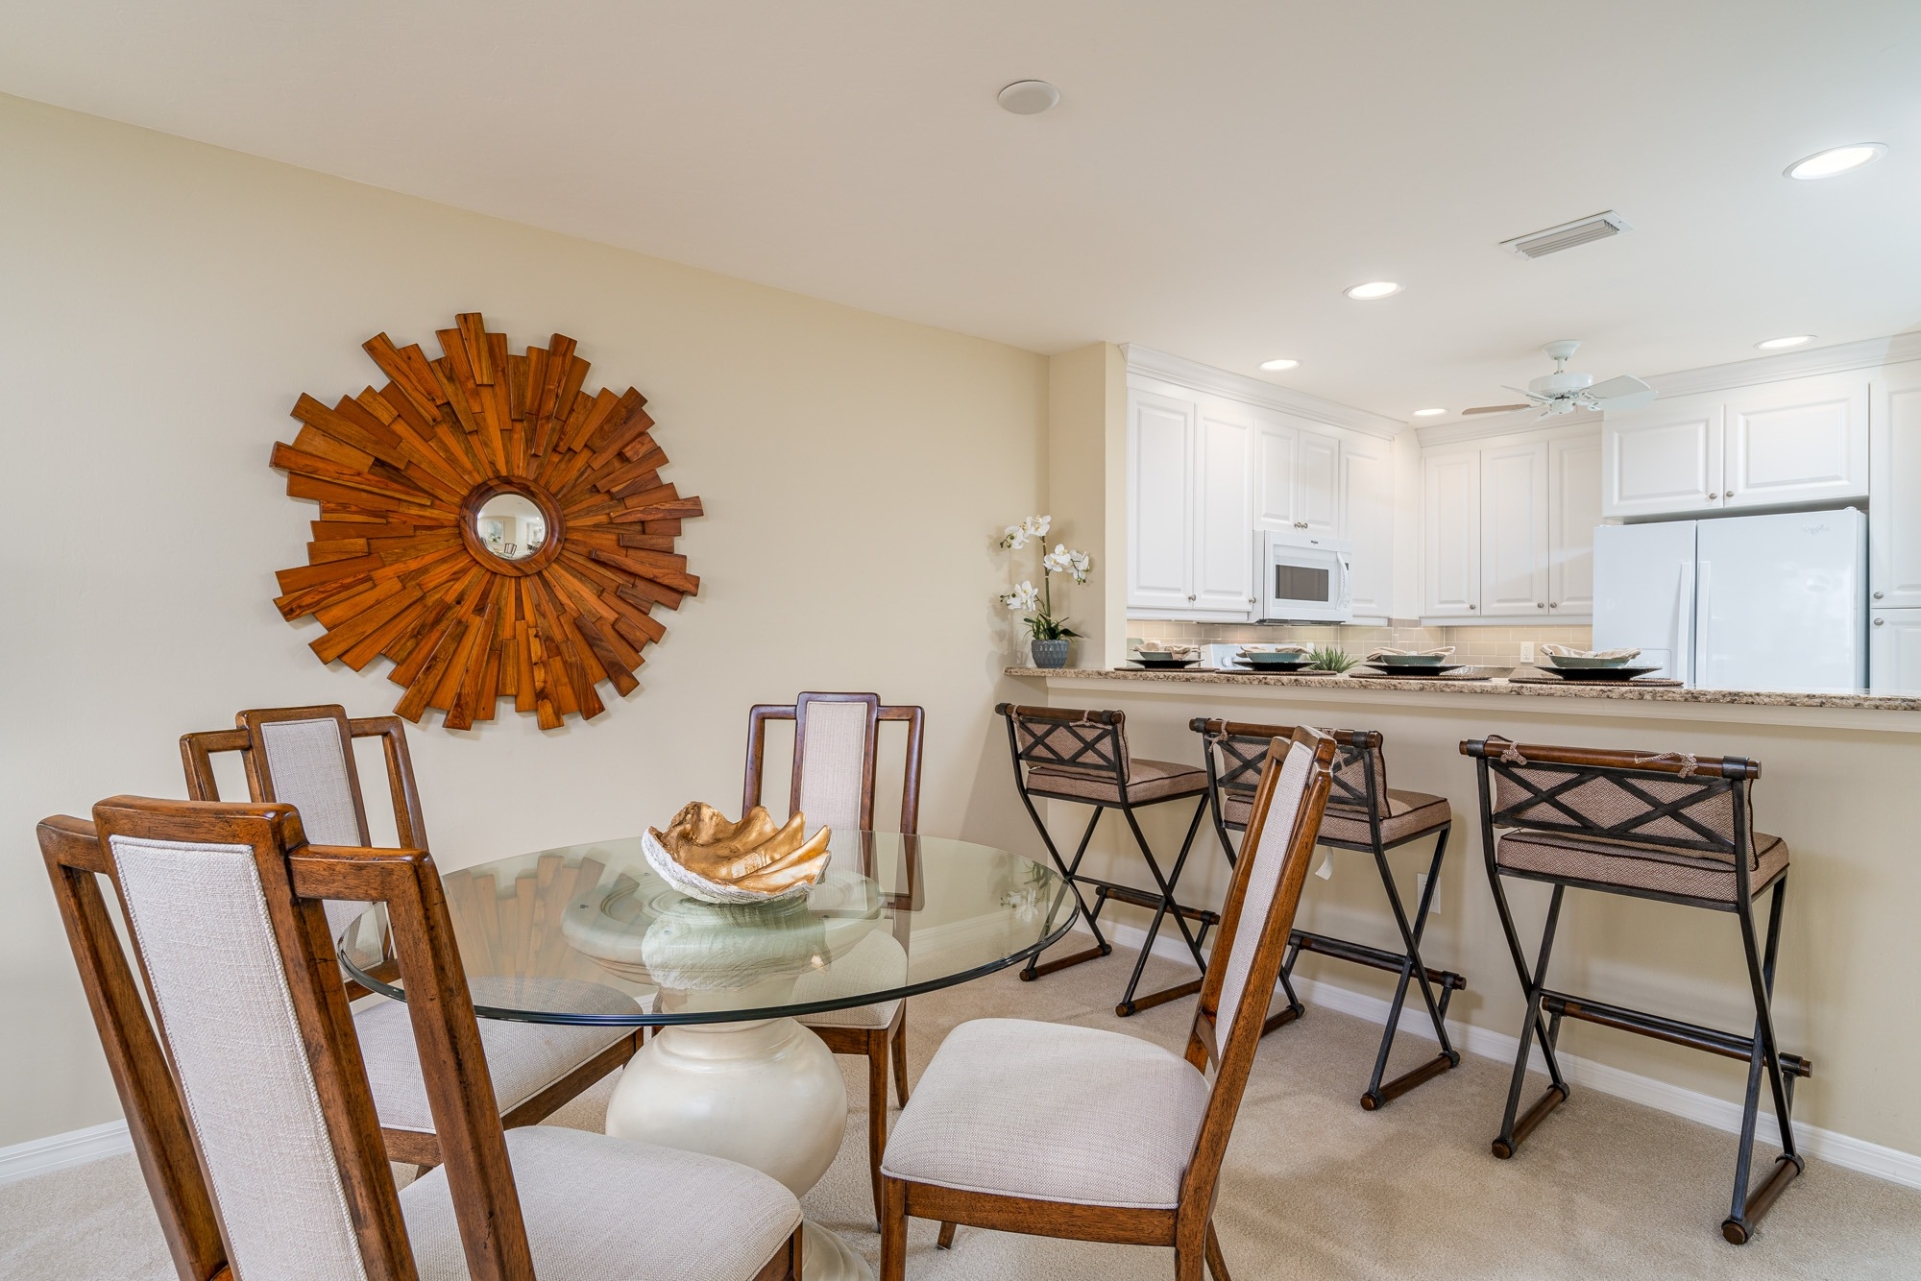 The dining room at the Junonia Model Home at Shell Point Retirement Community